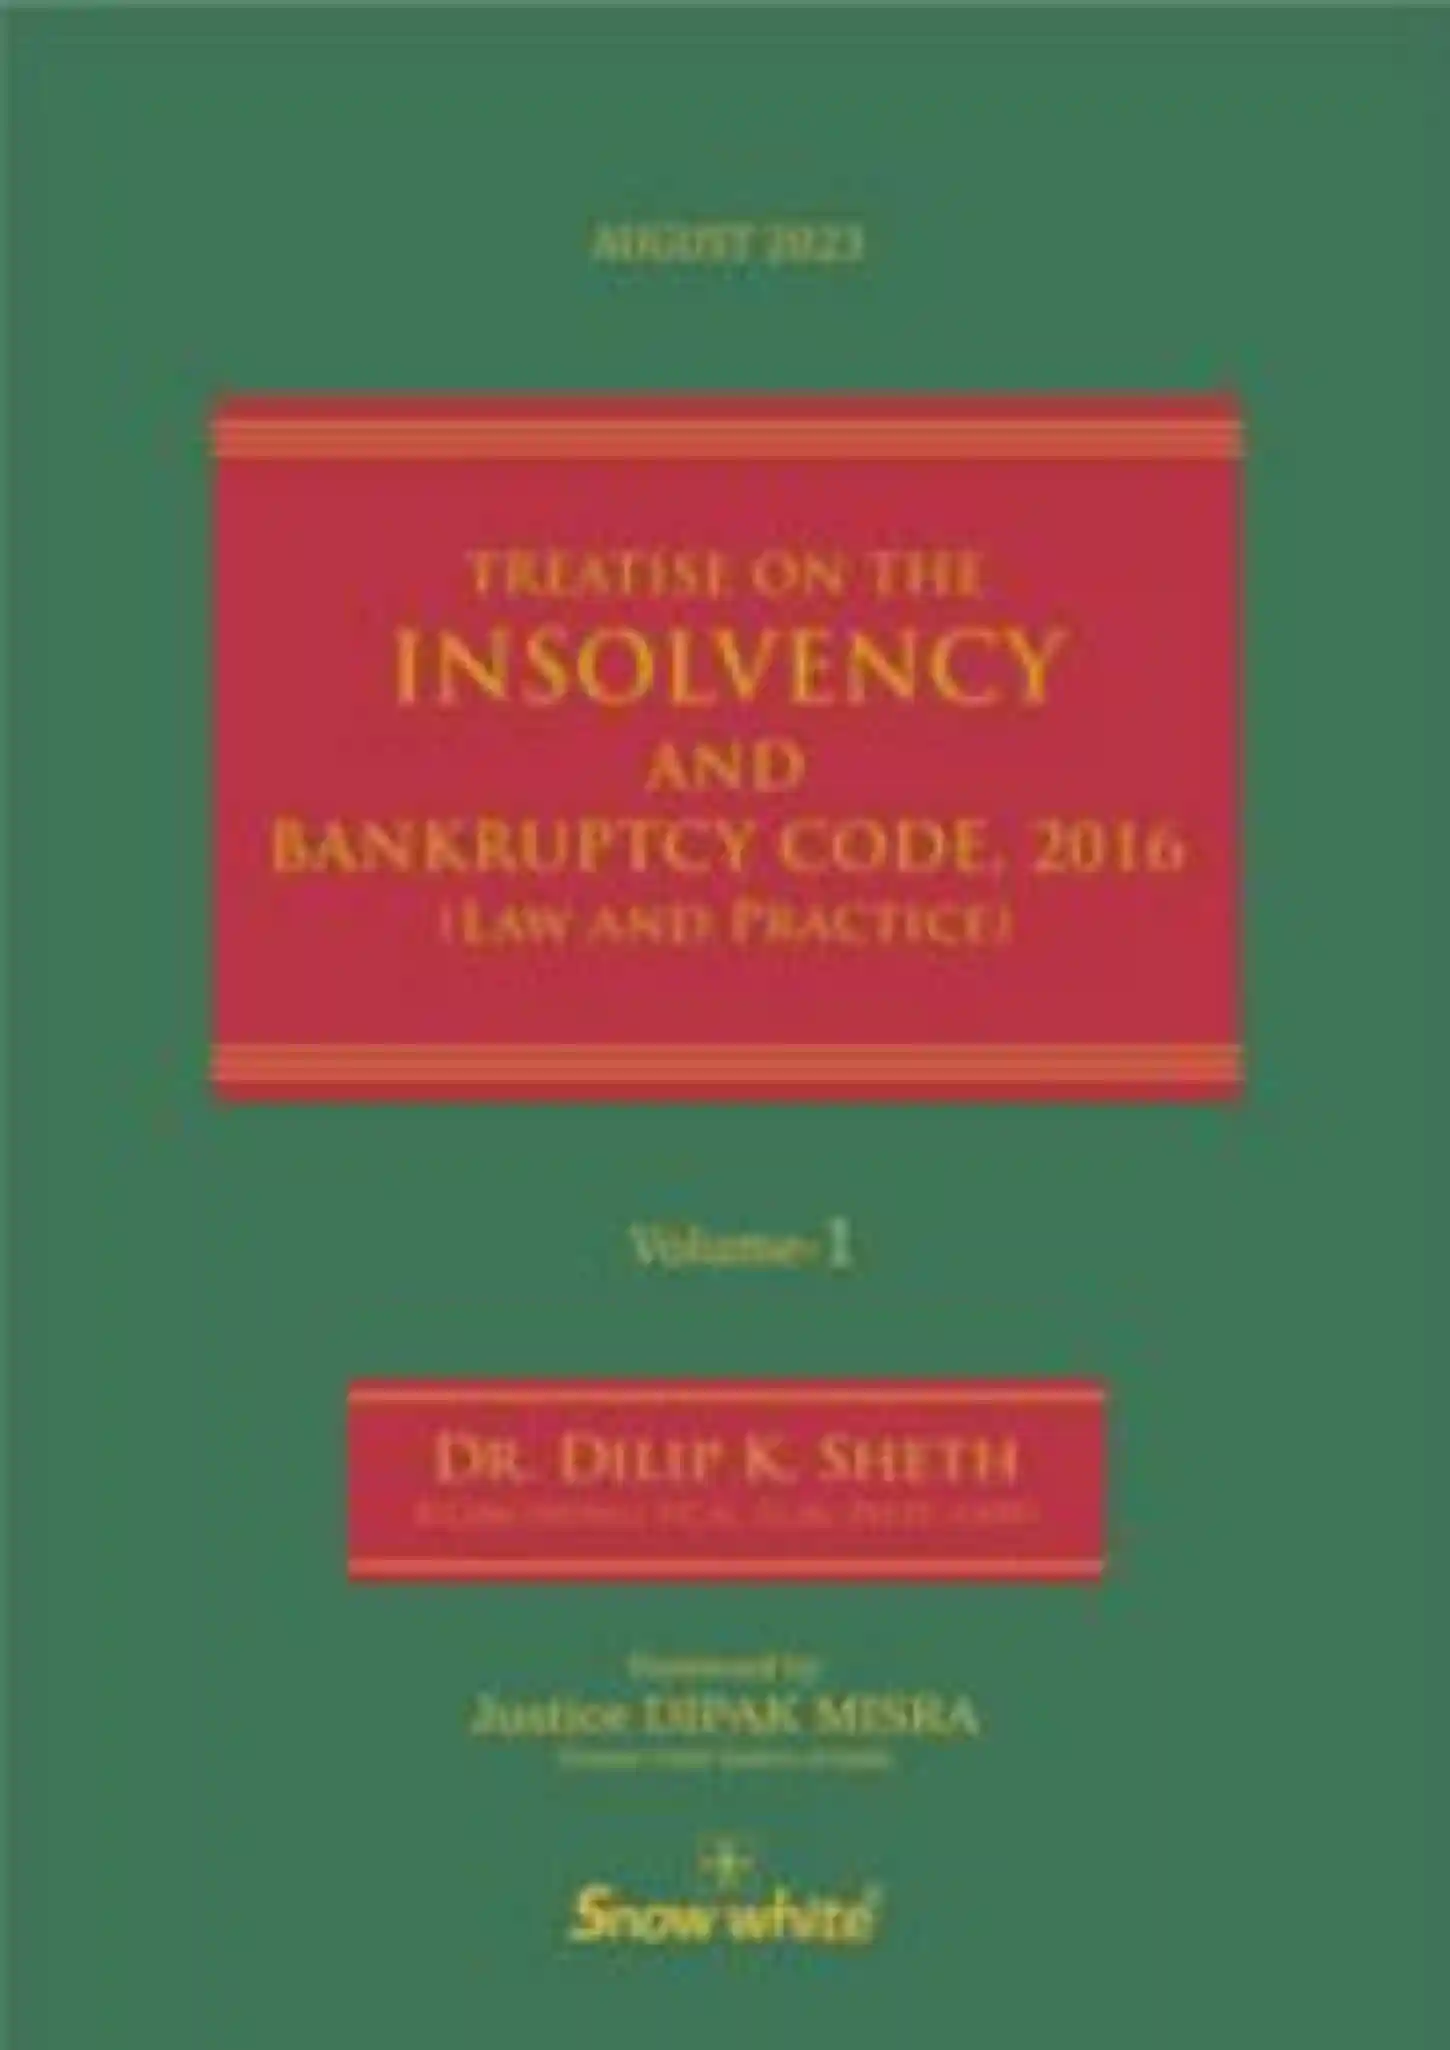 Treatise On The Insolvency And Bankruptcy Code, 2016 (Law And Practice) In 2 Volumes